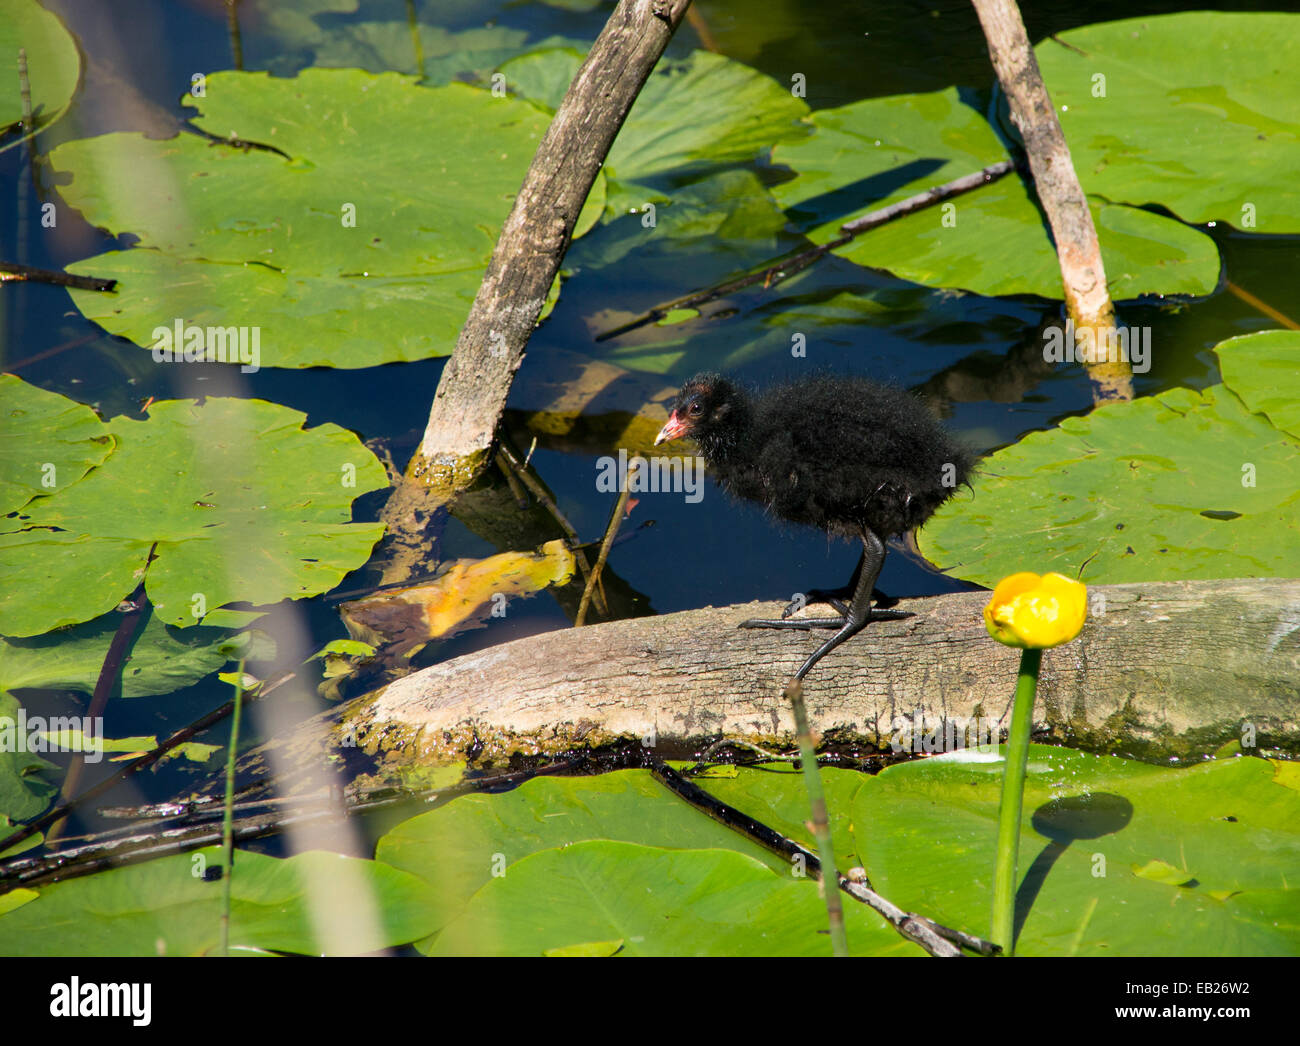 A Coot chick standing on a log in a pond Stock Photo